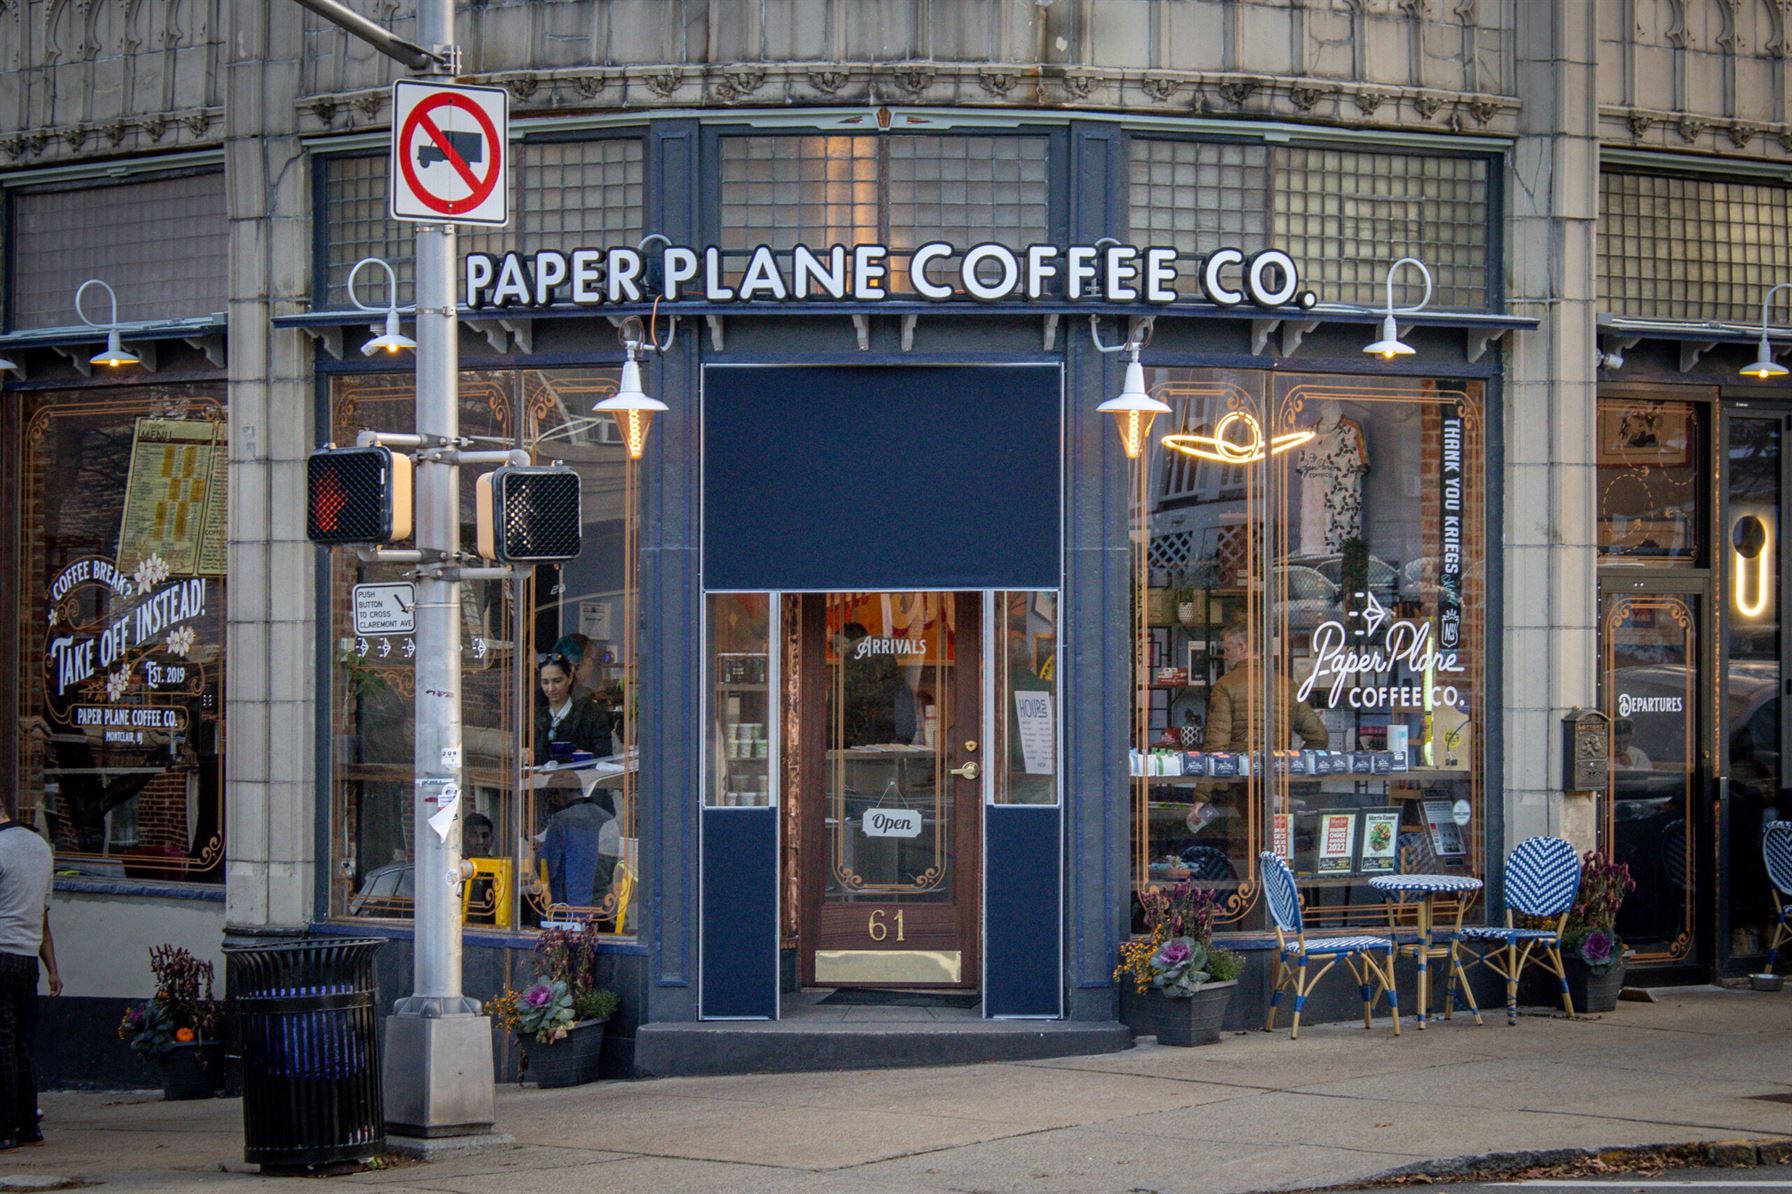 Paper Planes Co. located at 61 N Fullerton Ave, Montclair. Dani Mazariegos | The Montclarion